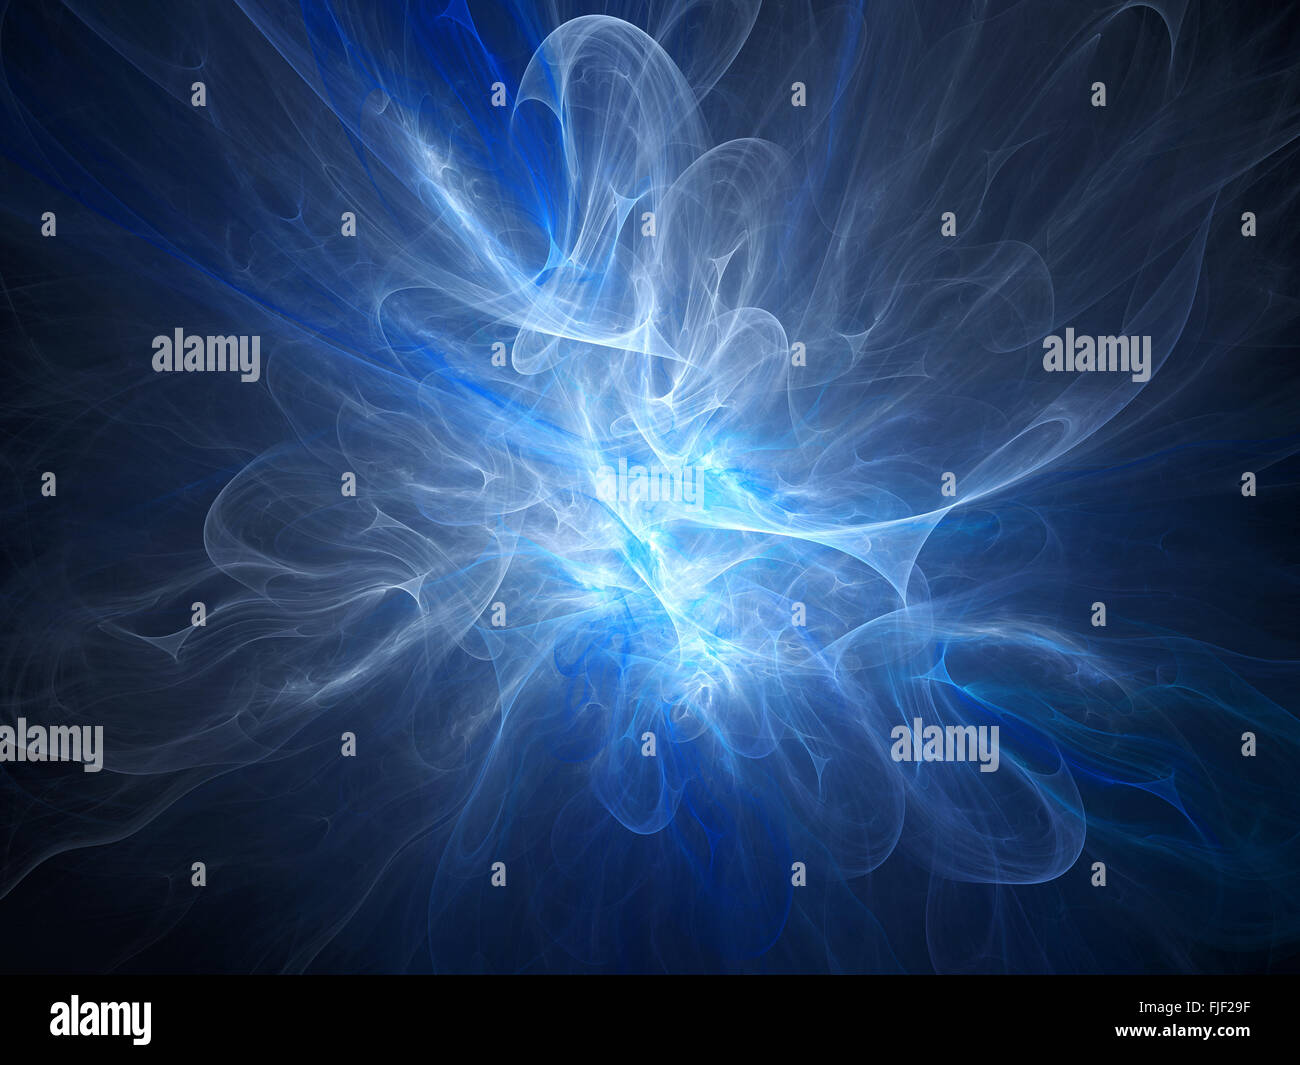 Blue glowing plasma flame, computer generated abstract background Stock Photo